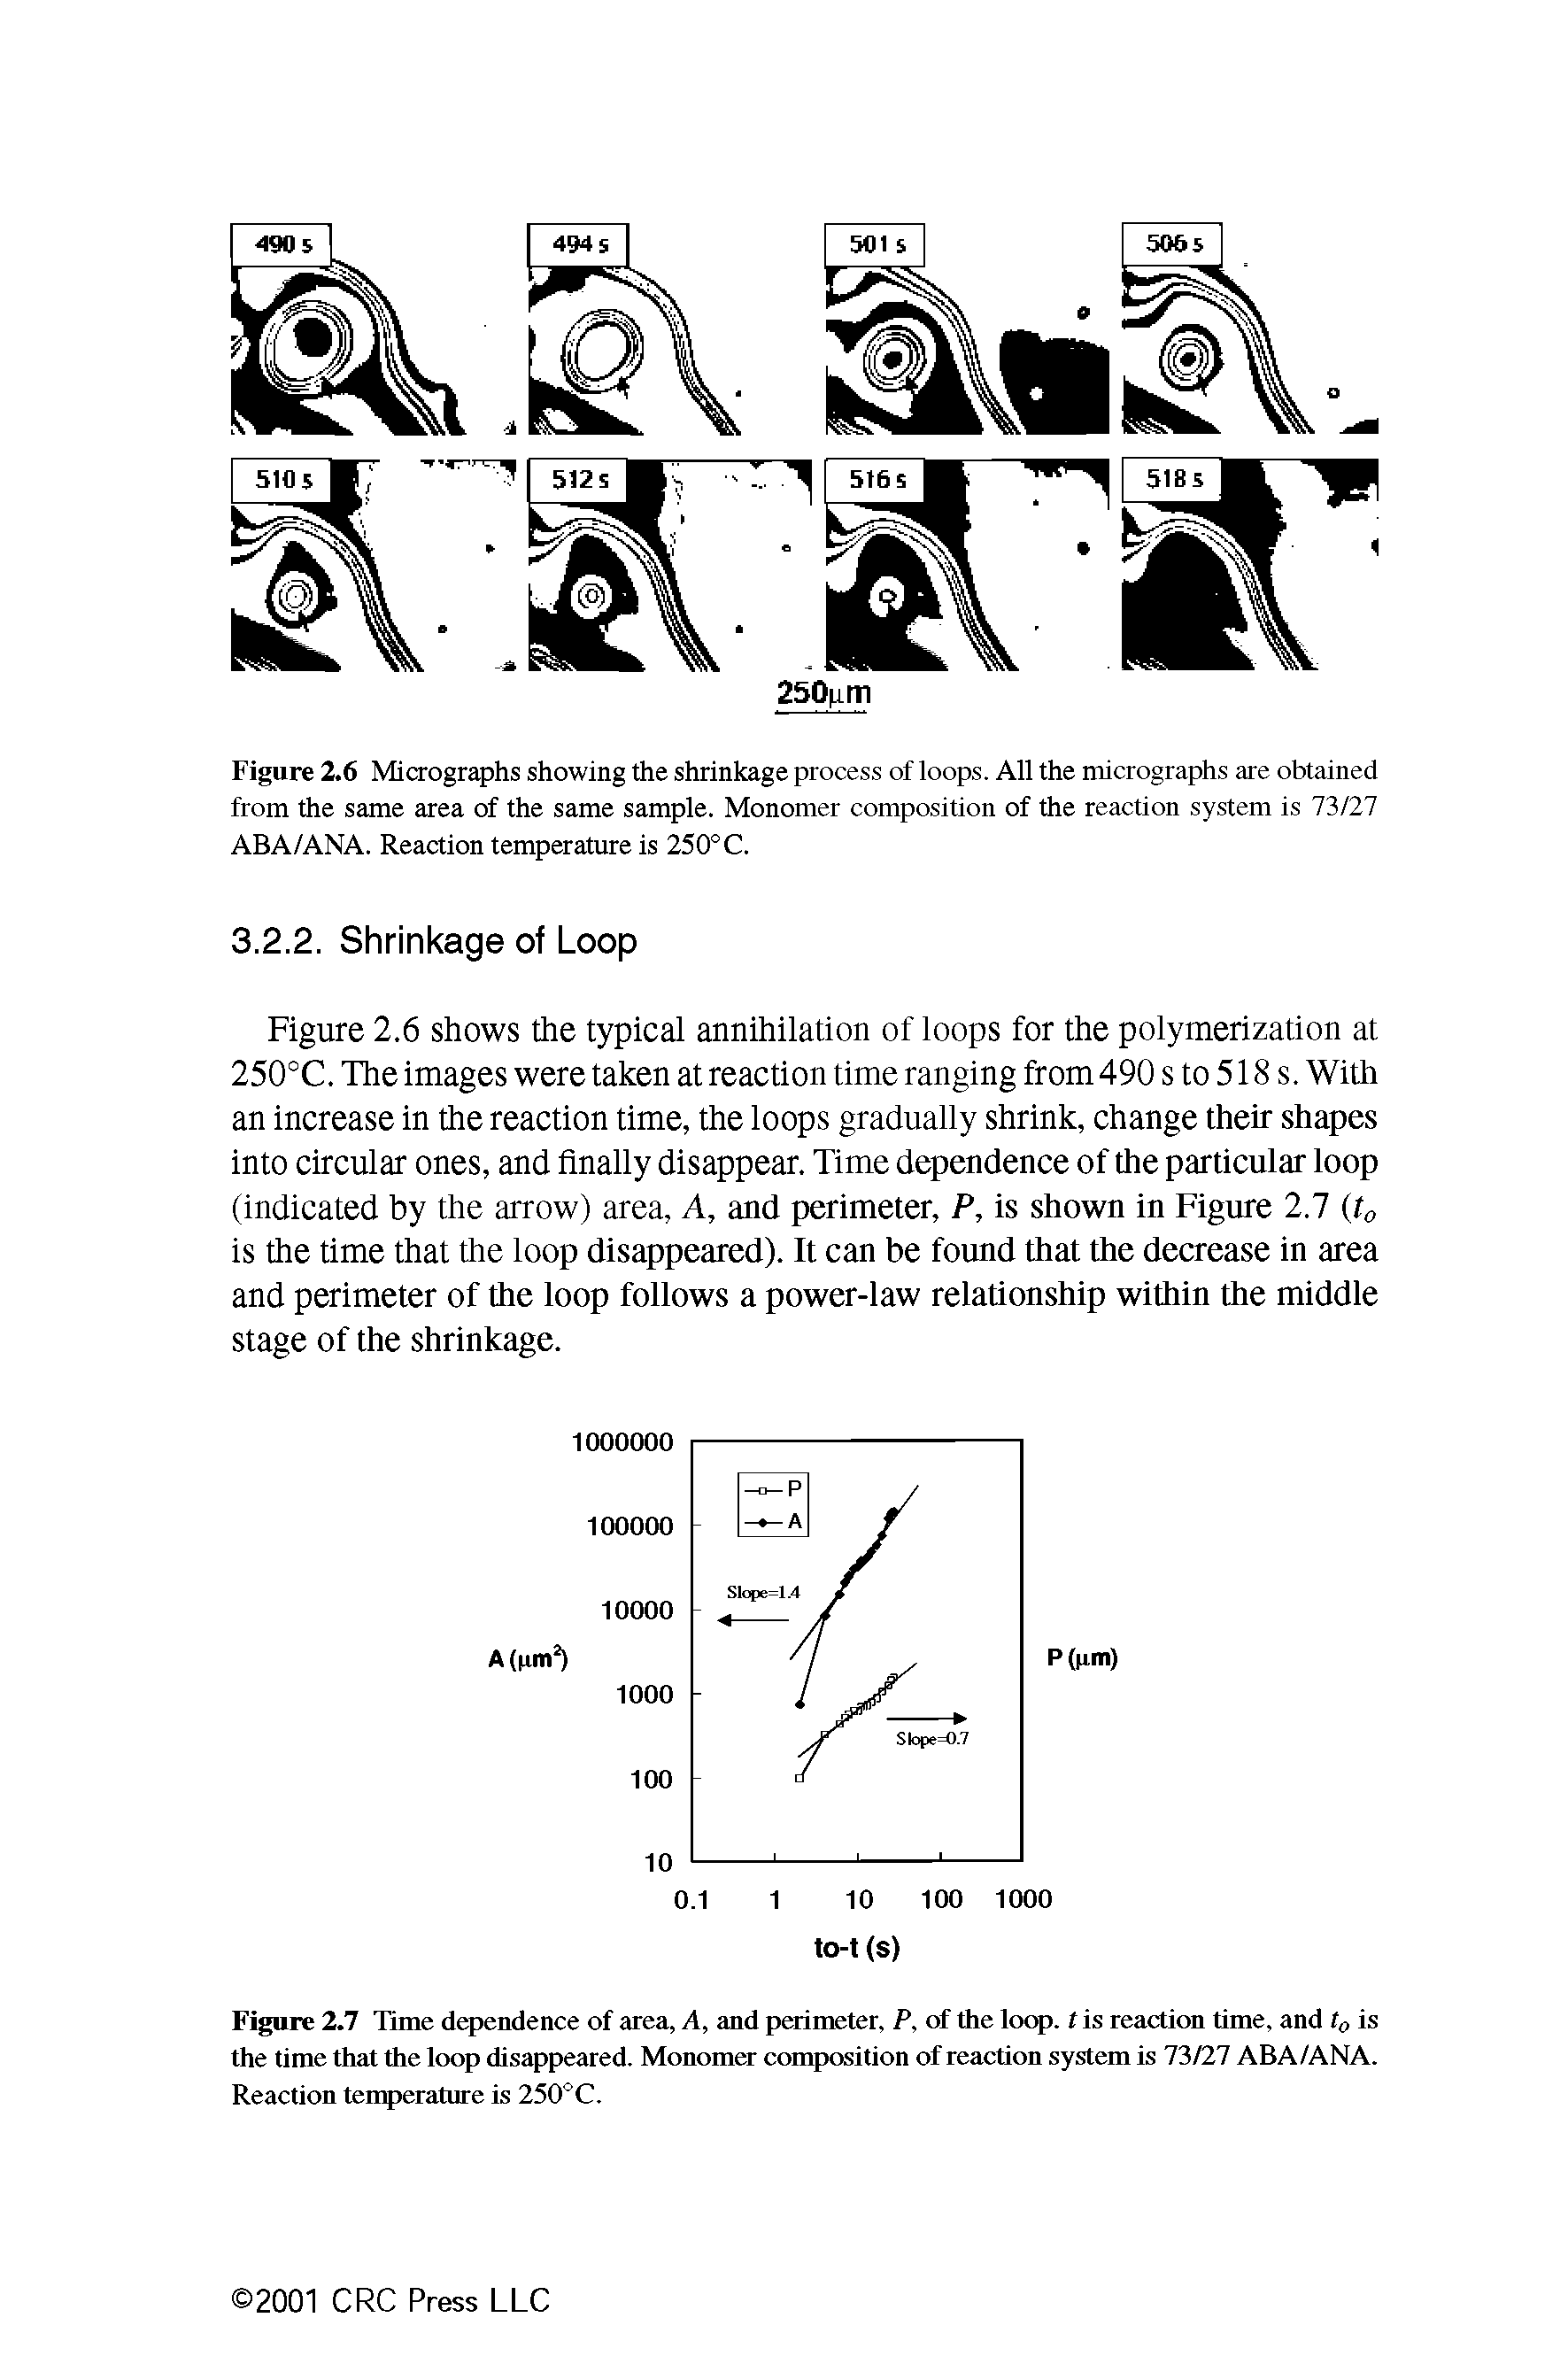 Figure 2.6 Micrographs showing the shrinkage process of loops. All the micrographs are obtained from the same area of the same sample. Monomer composition of the reaction system is 73/27 ABA/ANA. Reaction temperature is 250°C.